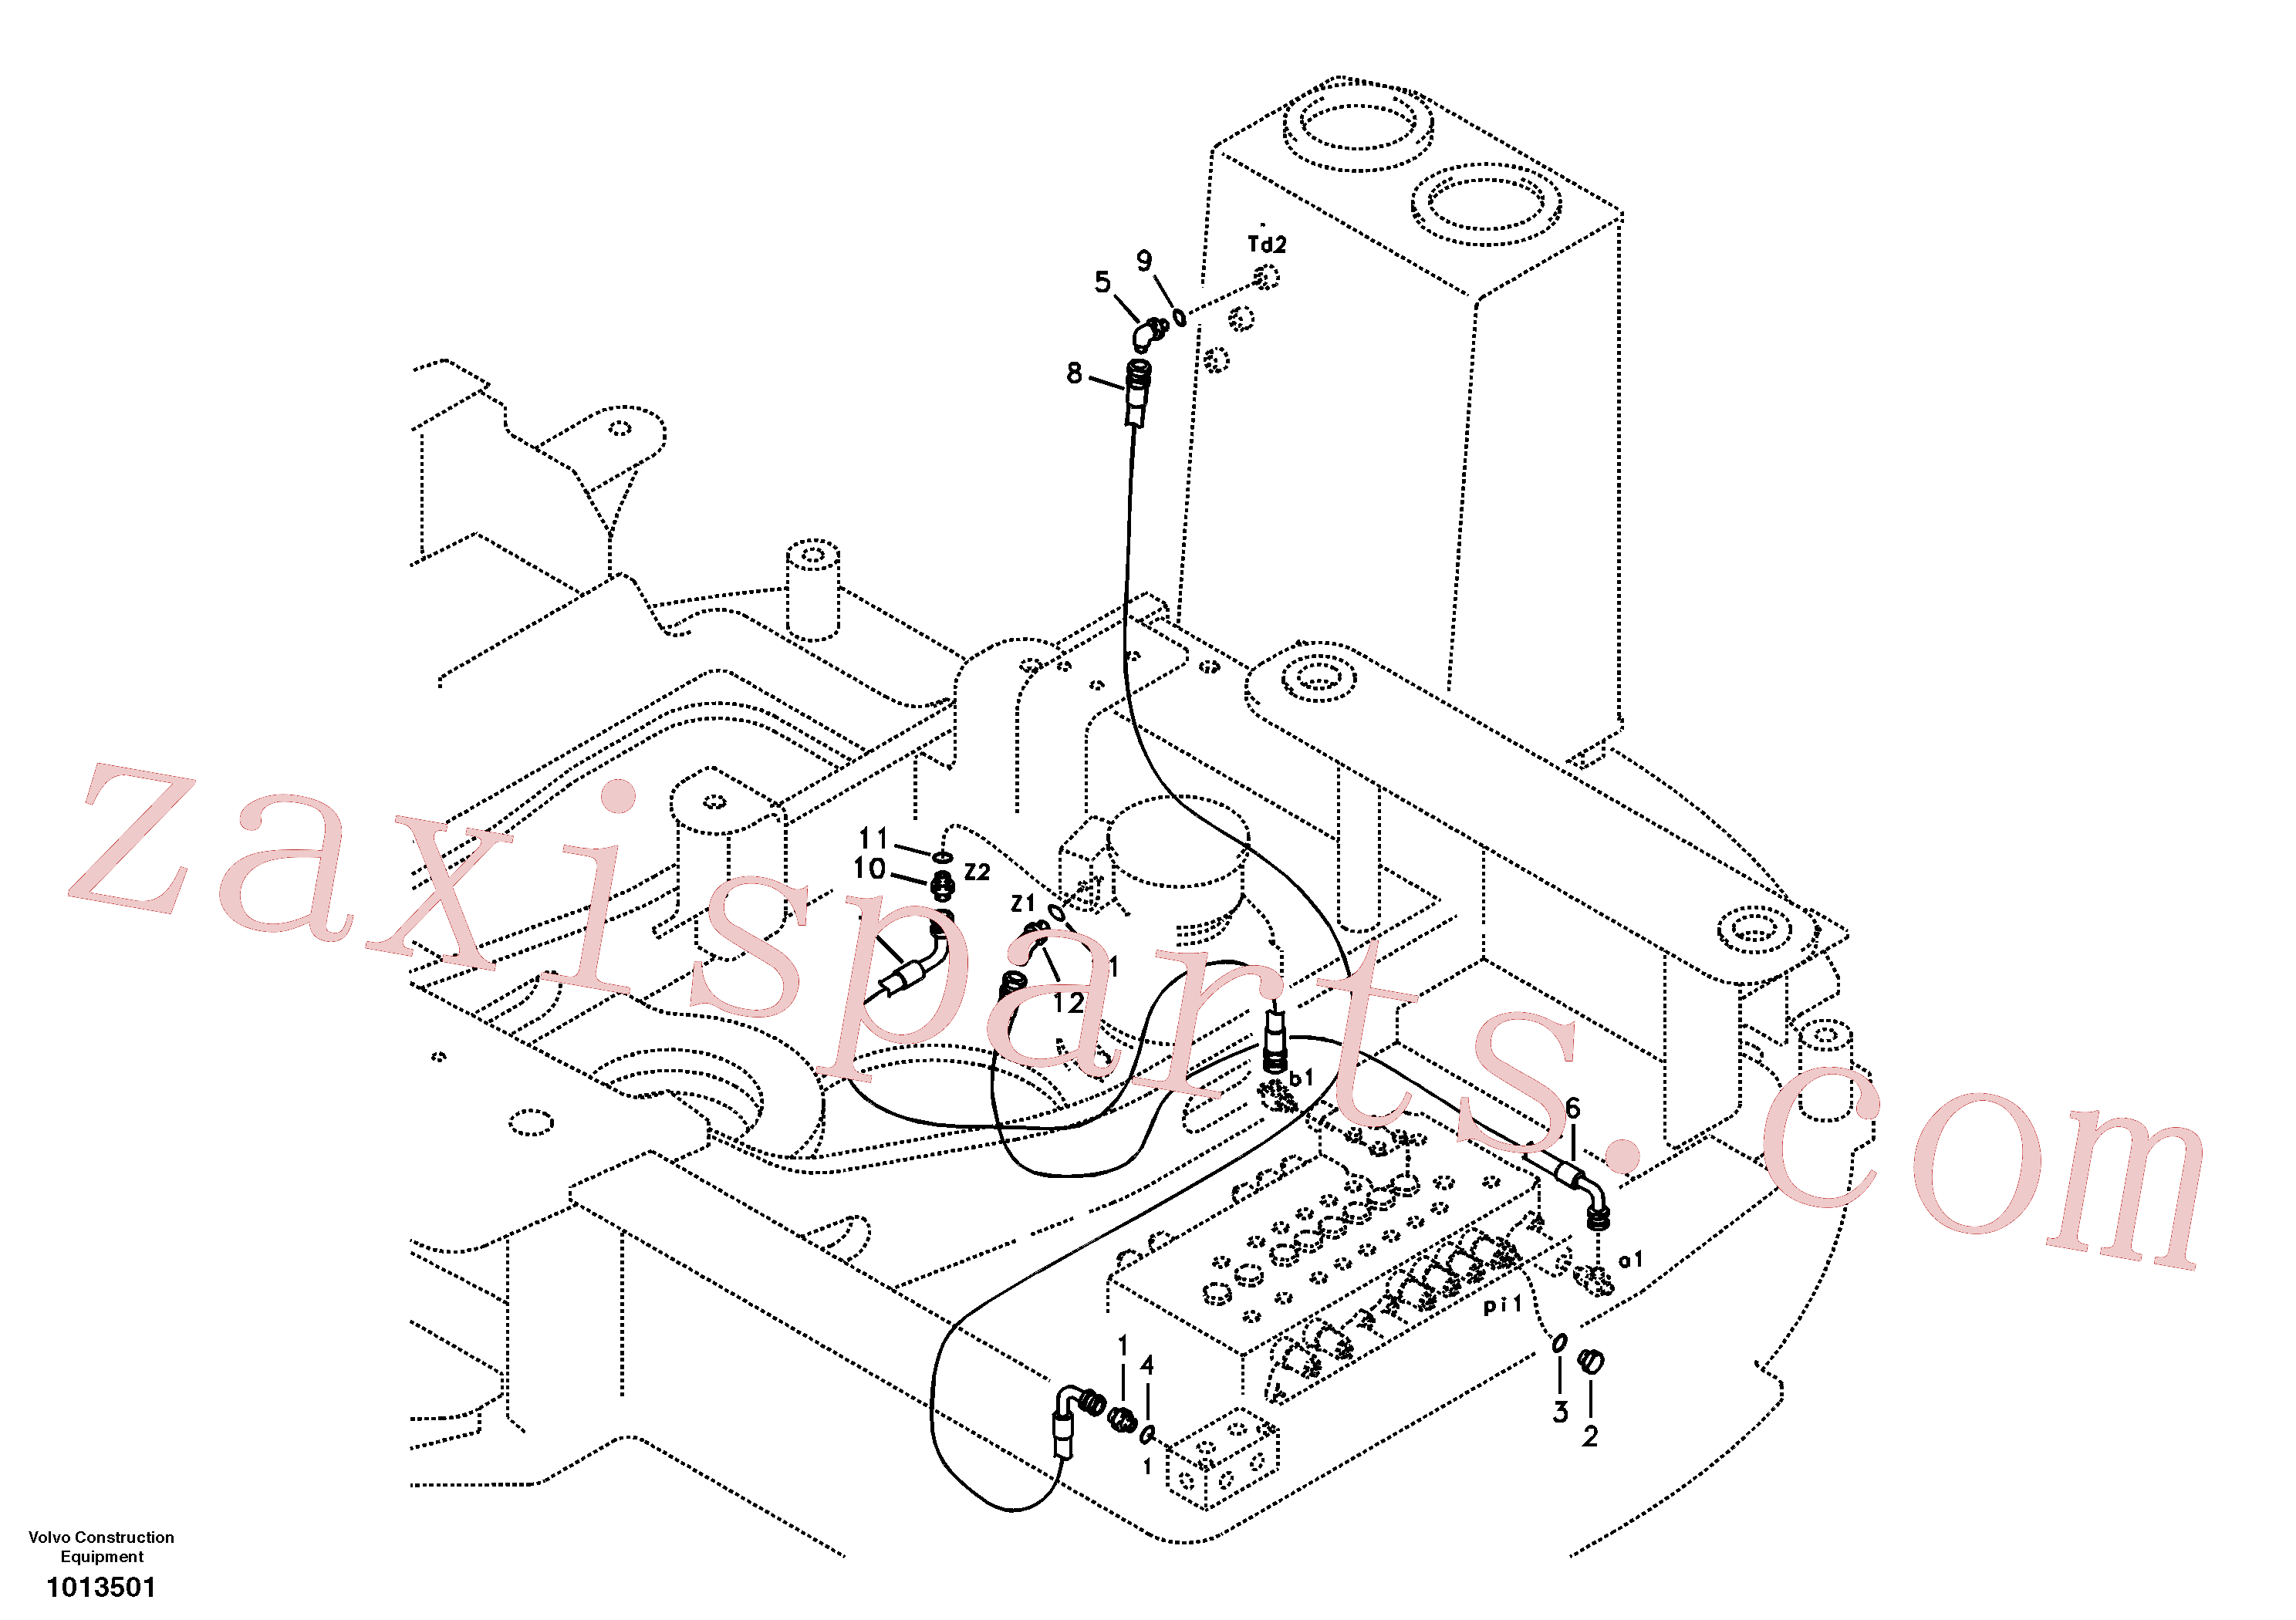 SA9453-03250 for Volvo Servo system, control valve piping.(1013501 assembly)